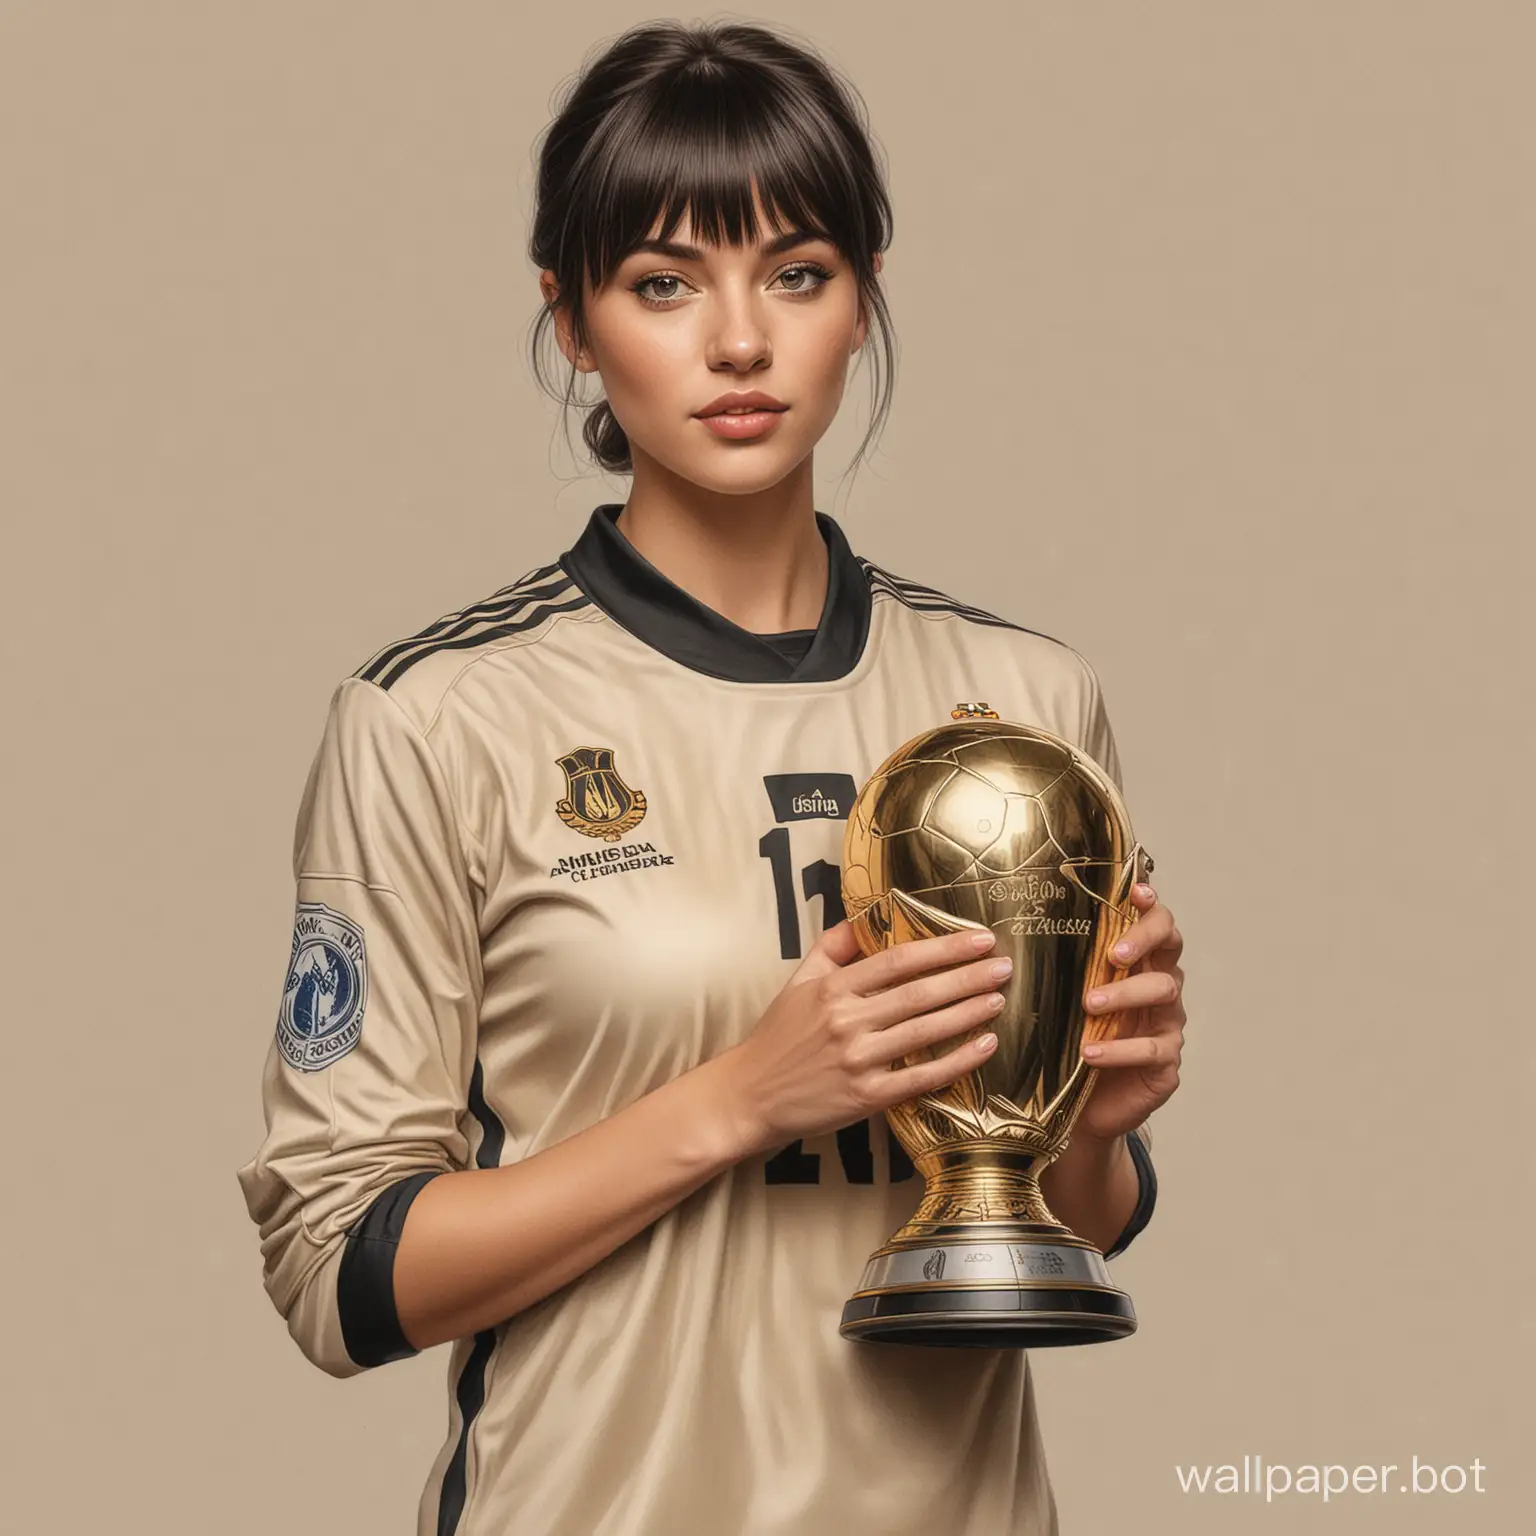 Sketch of Alina Lanina, 25 years old, dark short hair with bangs, cup size 7, narrow waist, in beige-black soccer uniform, holding the Champions Cup on a white background, very realistic drawing with colored pencil.